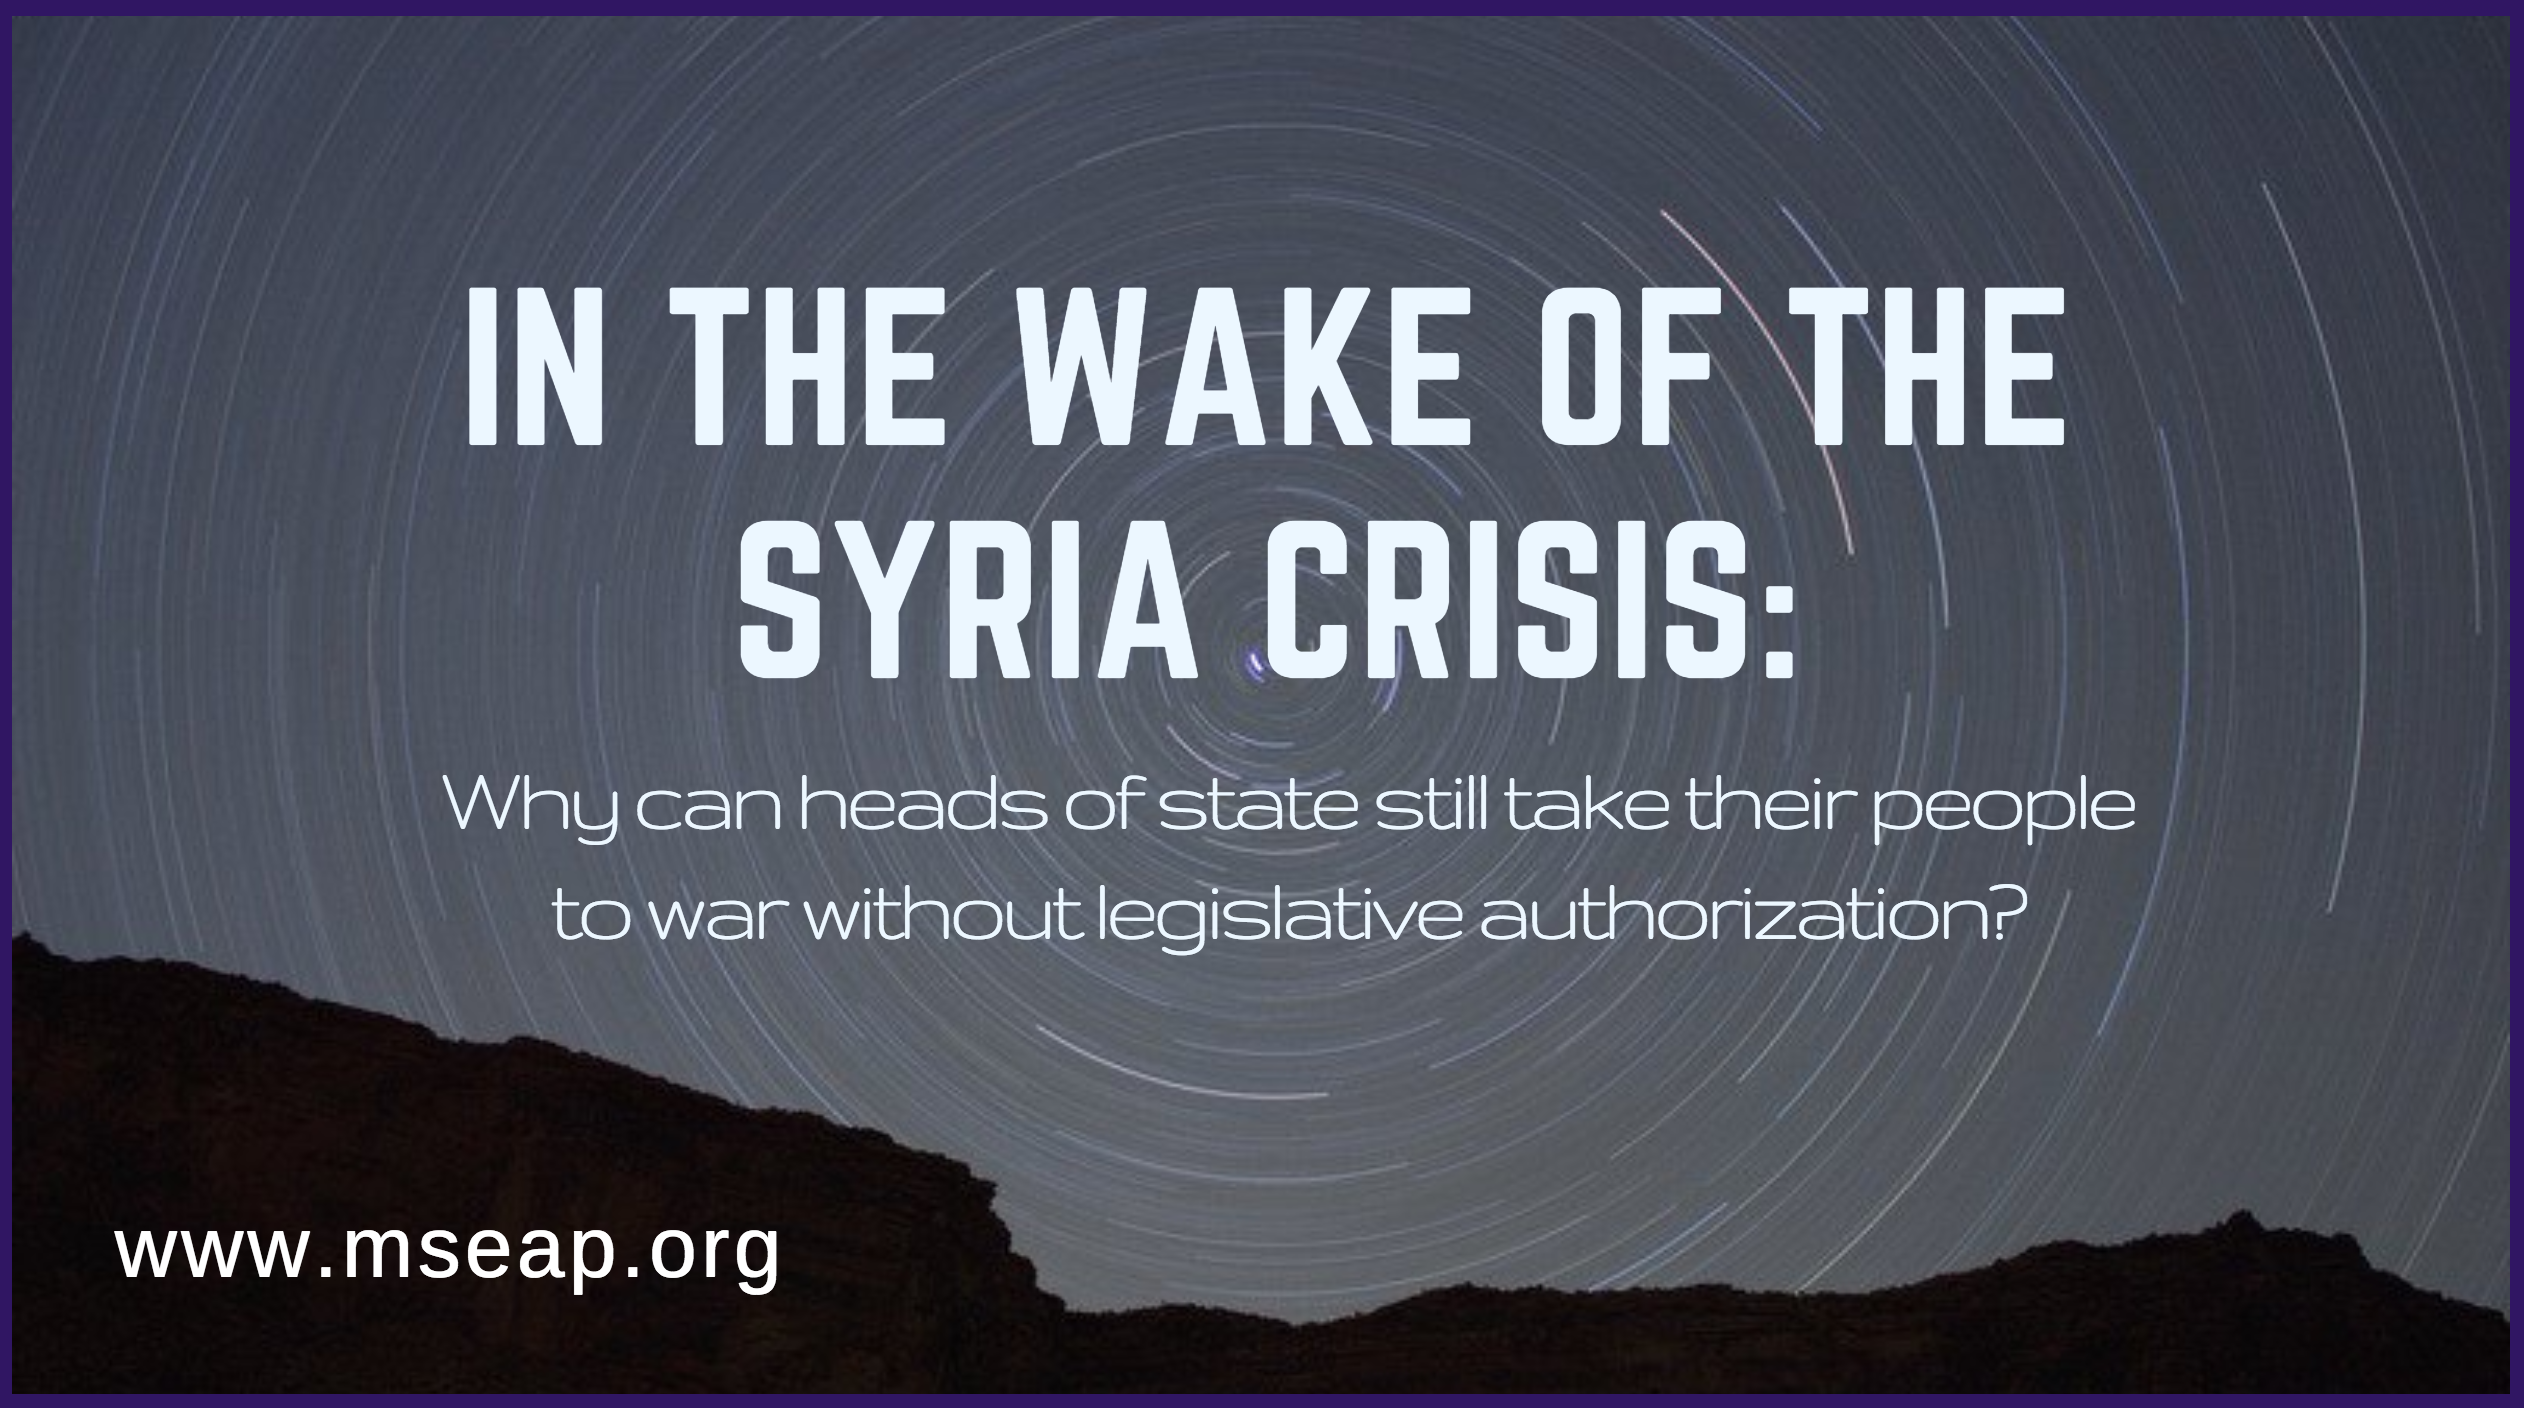 [Feature] In the wake of the Syria crisis: Why can heads of state still take their people to war without legislative authorization?